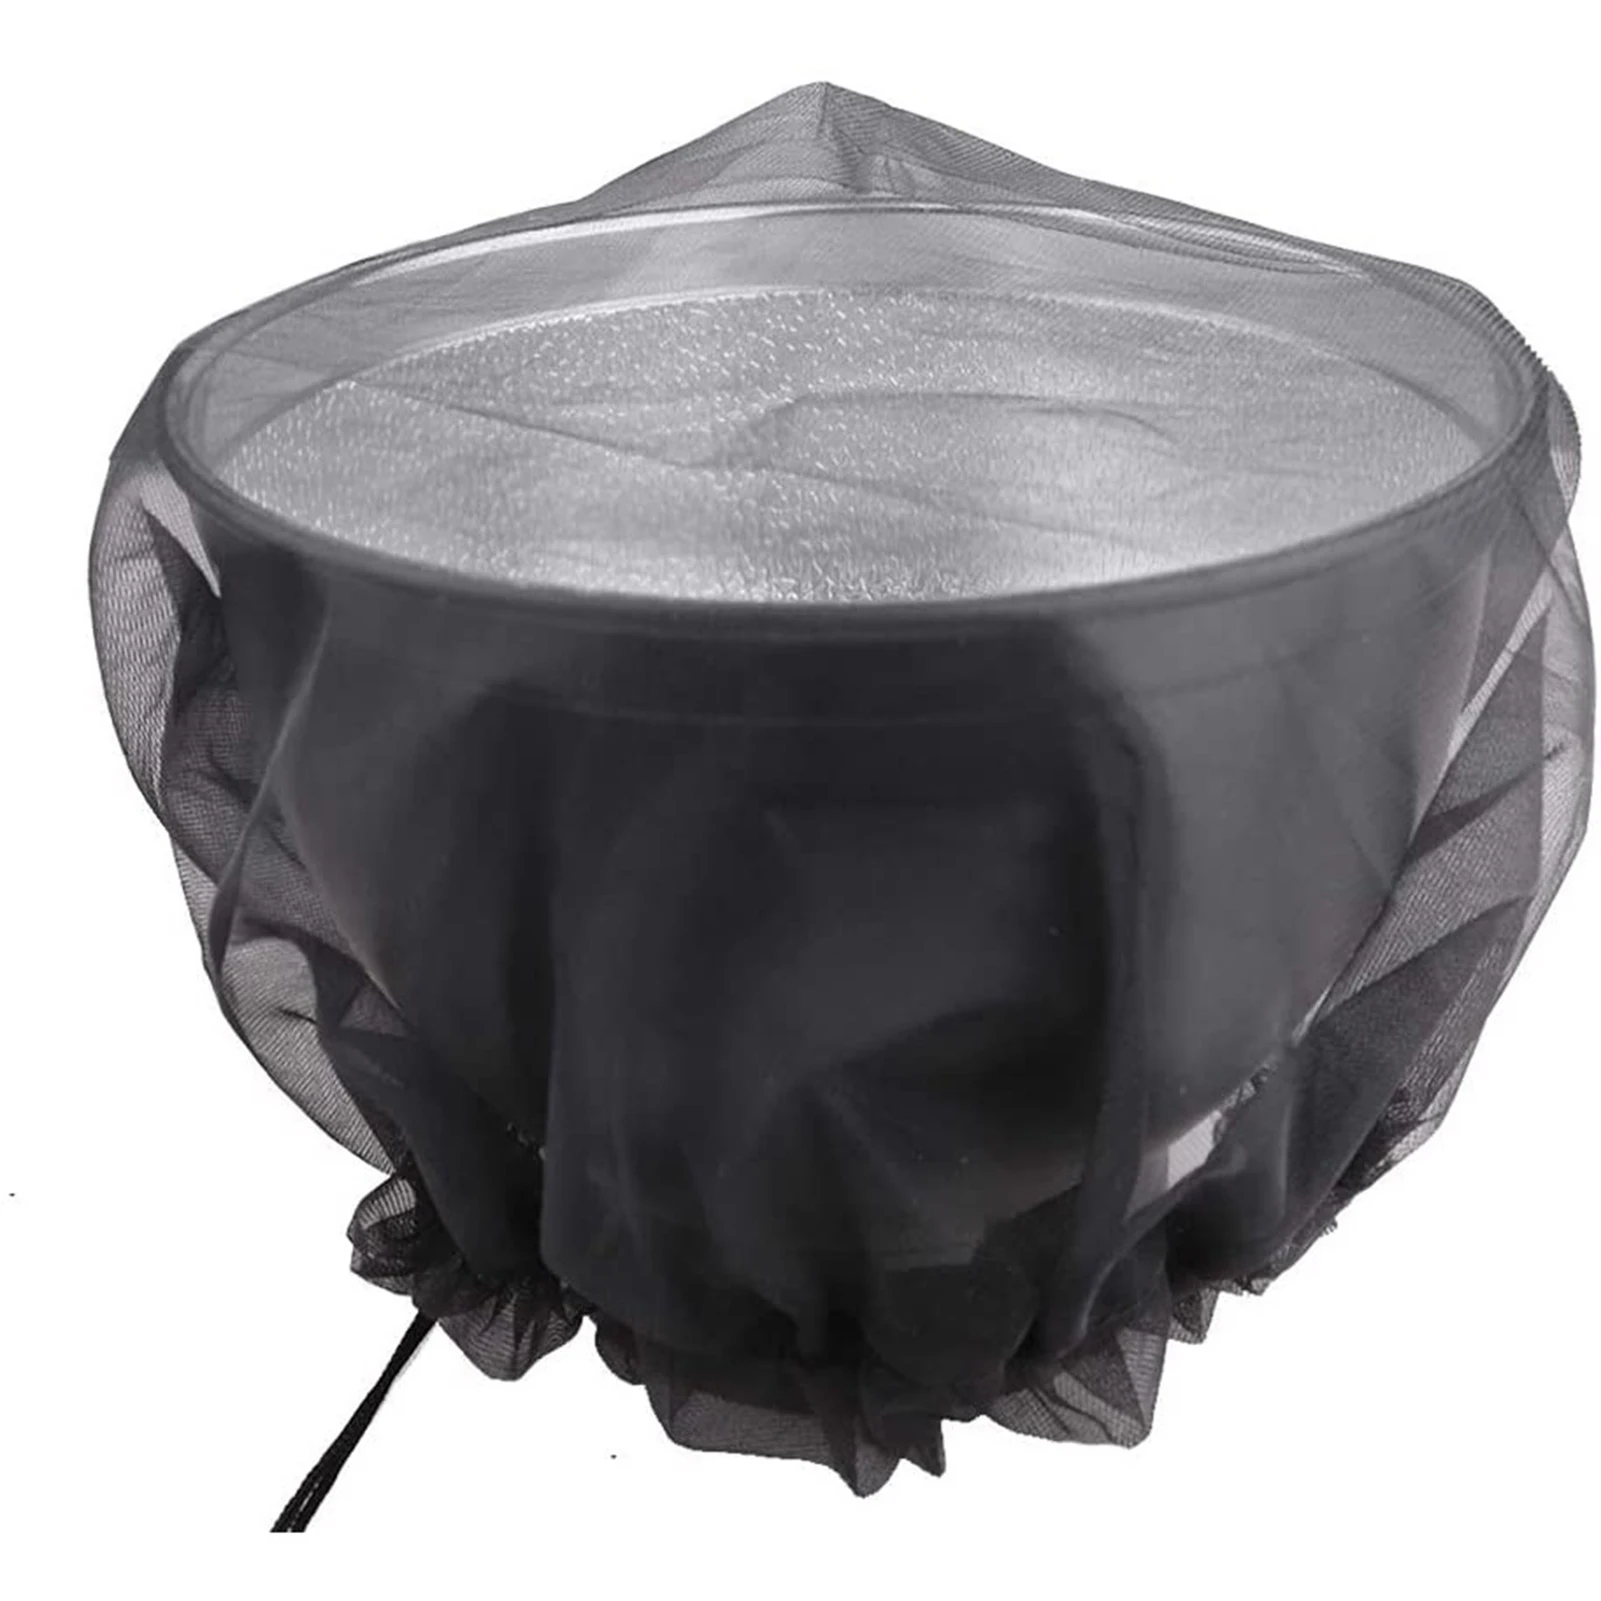 Mesh Cover Netting For Rain Barrels Water Collection Buckets Tank Raindrop Harvesting Tool AntiMosquito Water Protection